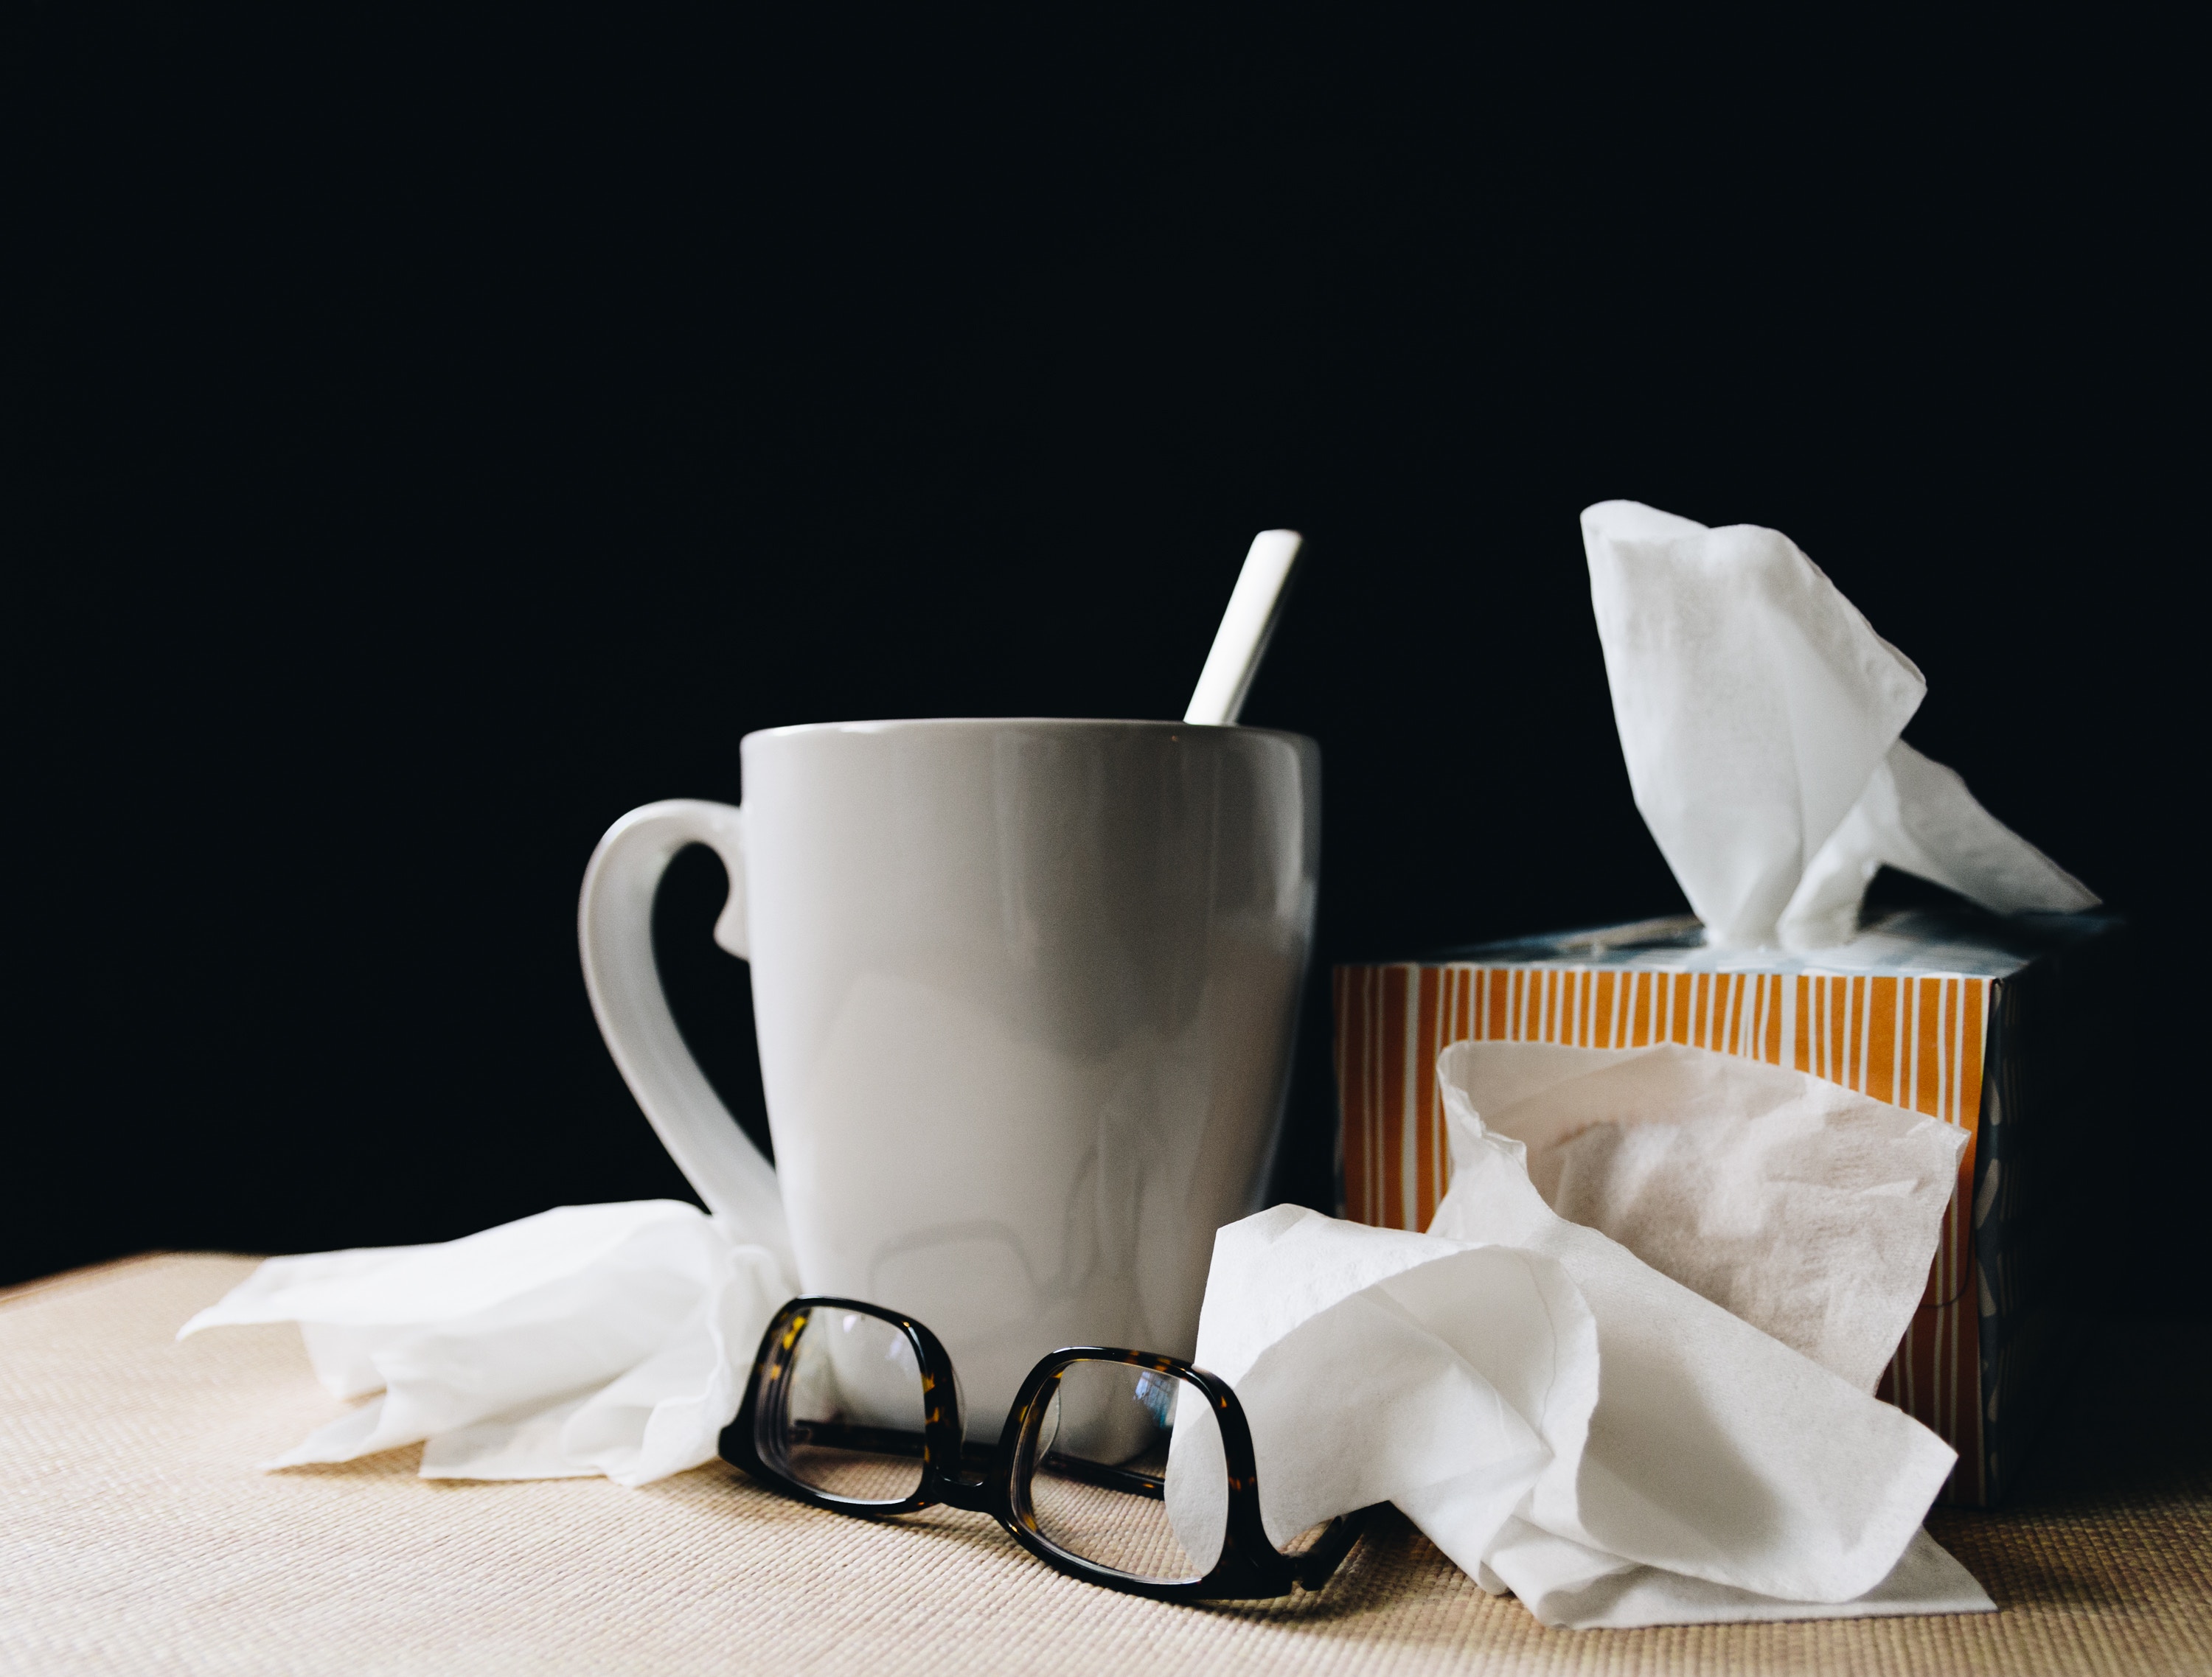 Worried About Being Sick on Your Wedding Day? Here’s What to Do.